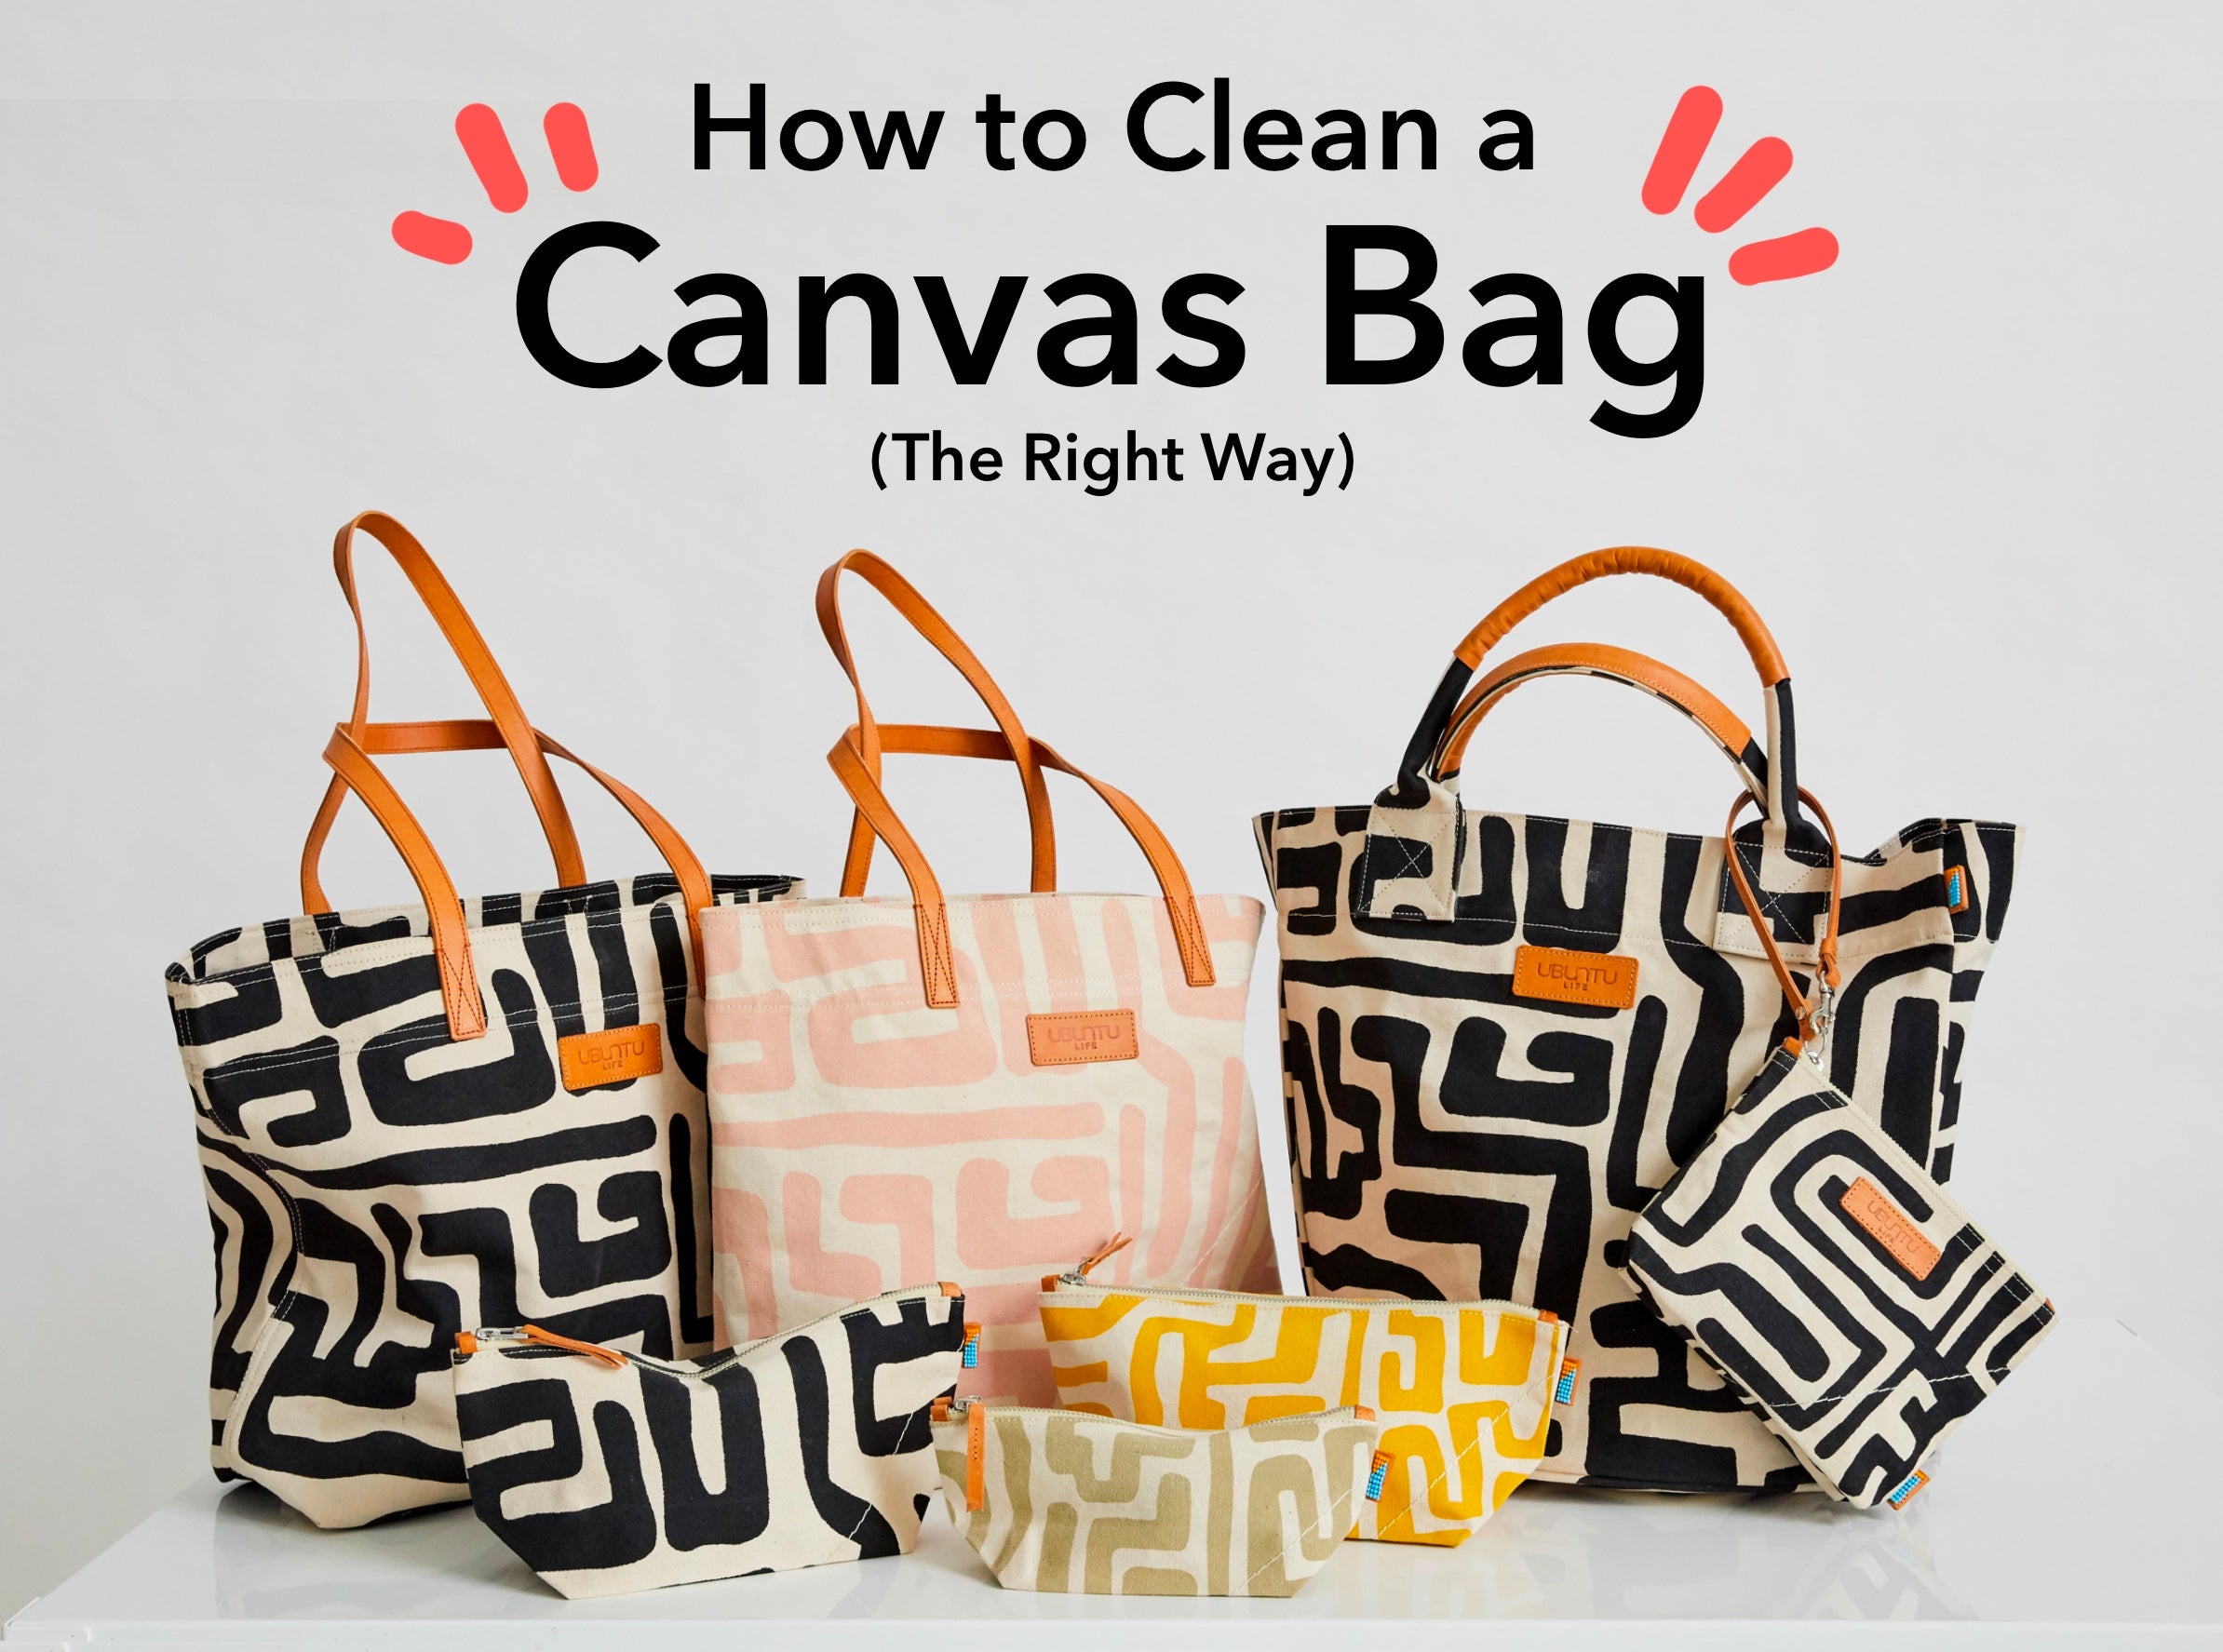 How to Clean Tote Bags - How To Clean An L.L. Bean Bag